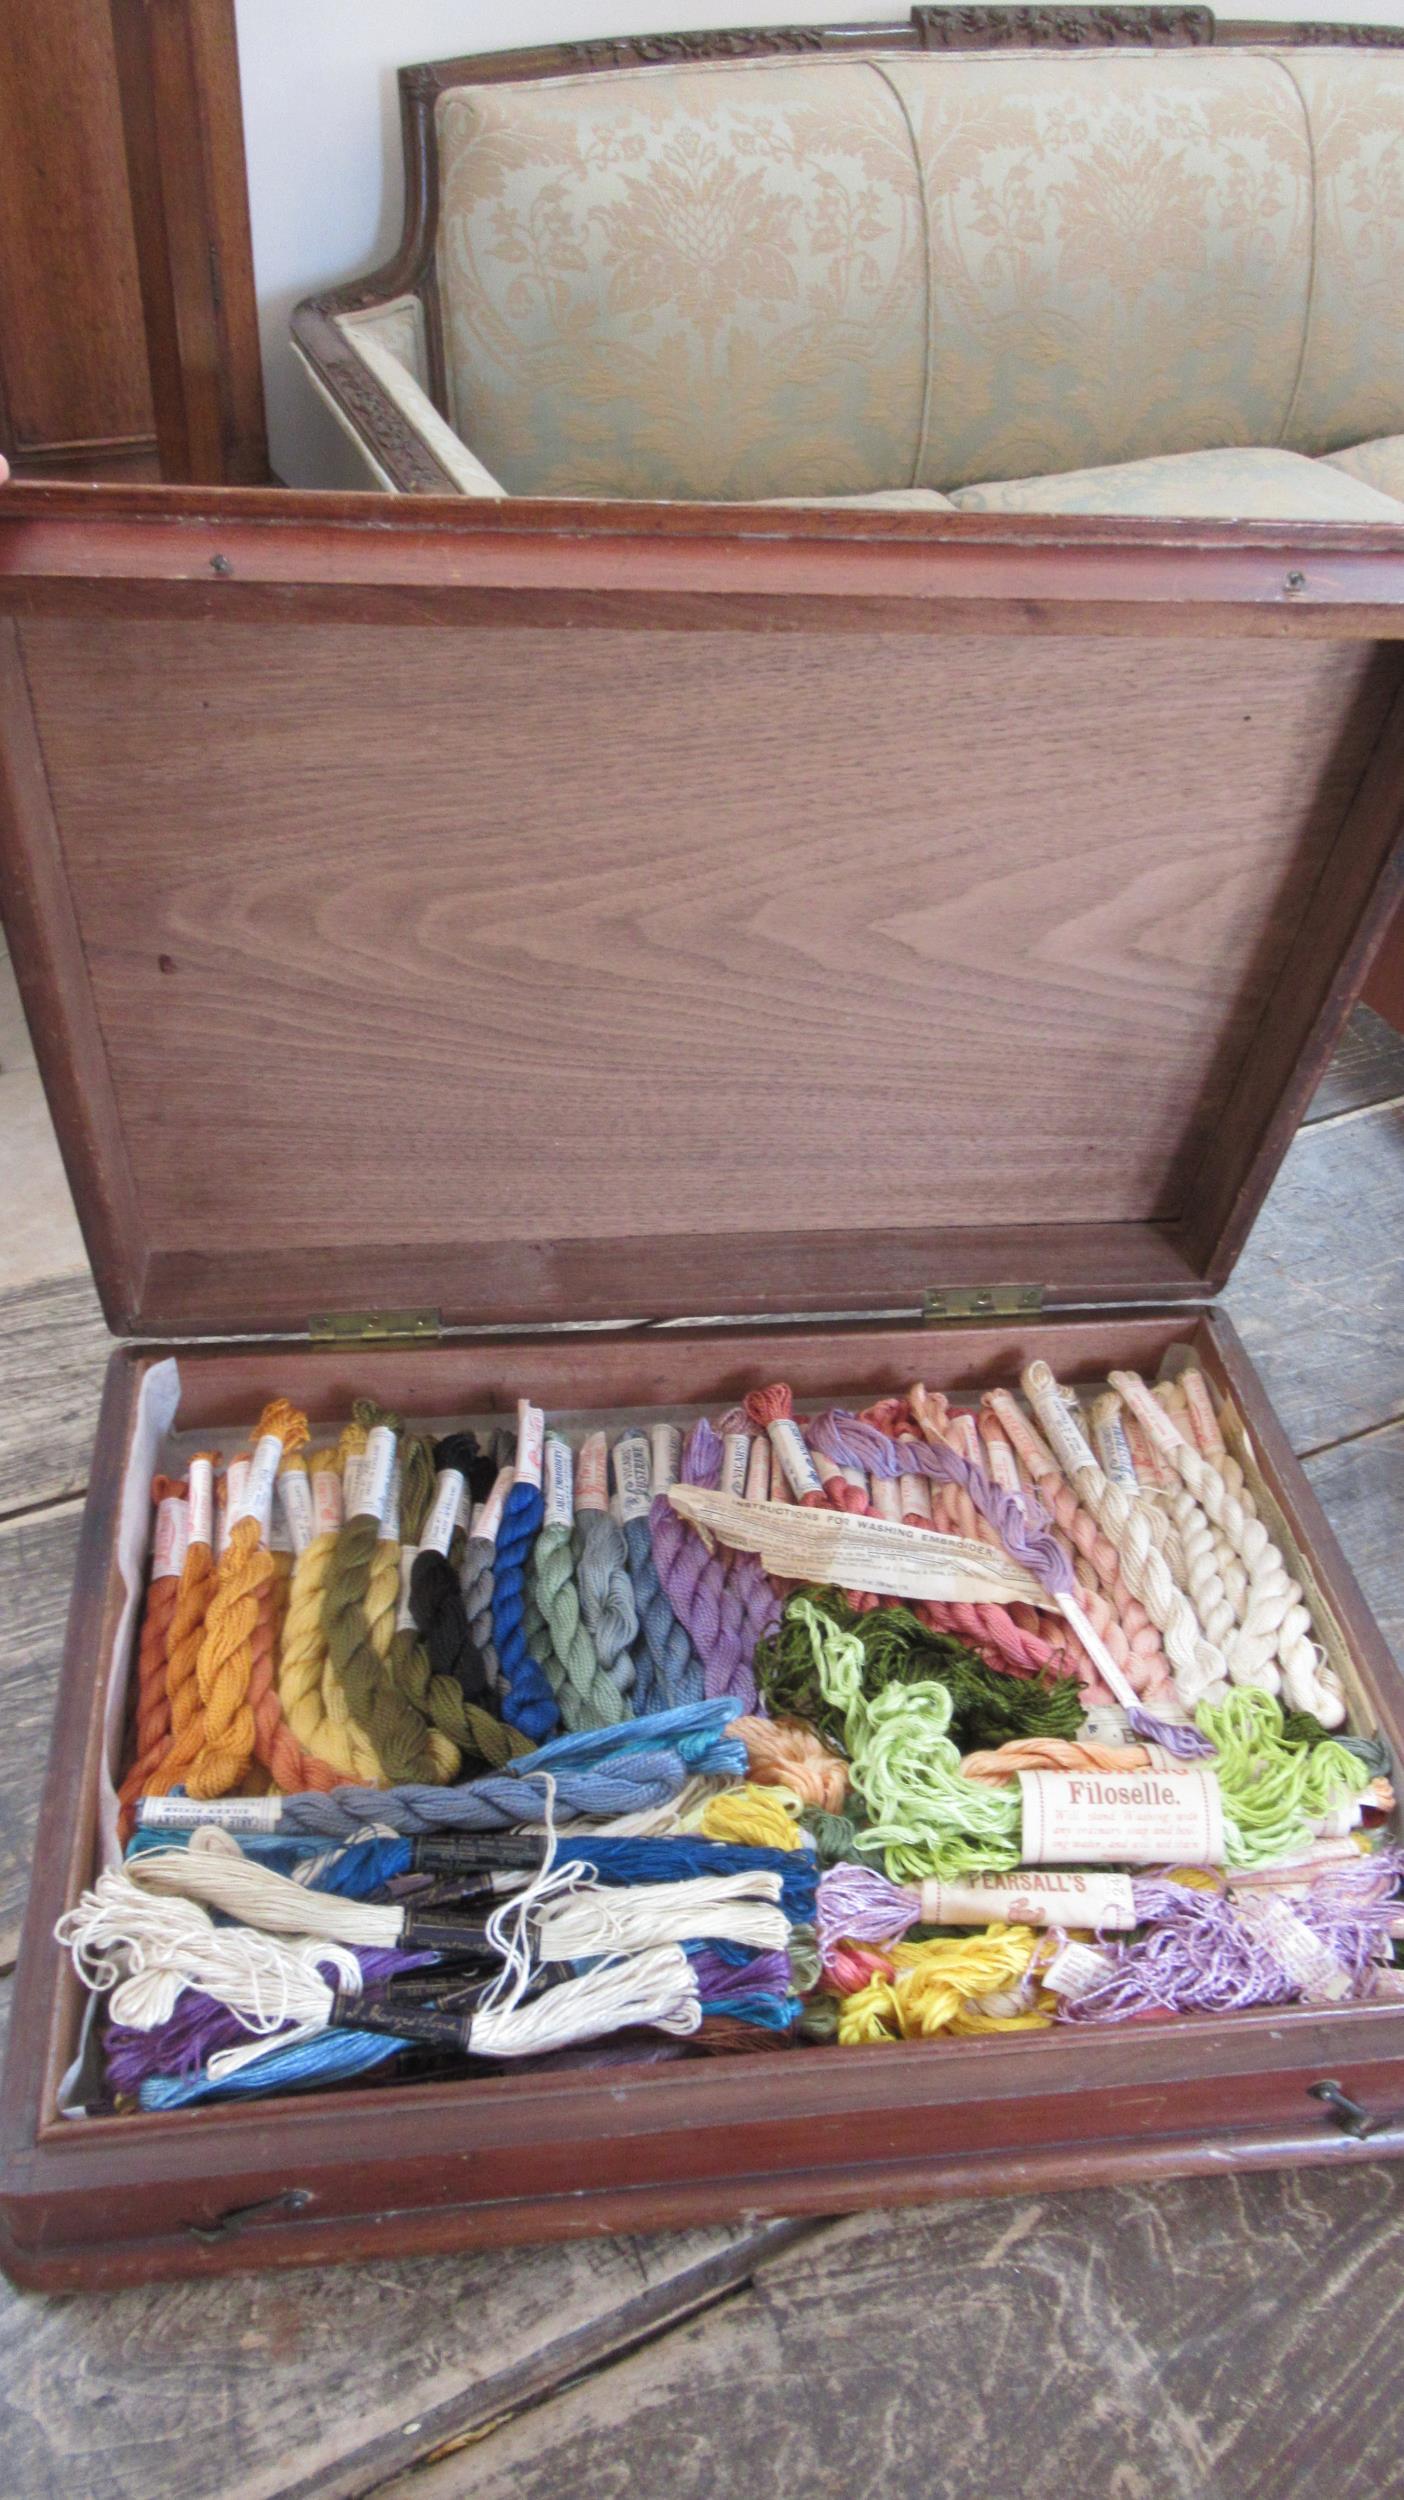 A J and P Coats Ltd sewing cotton box containing approx 200 silk skeins, 47cm wide x 33.5cm deep x - Image 2 of 2